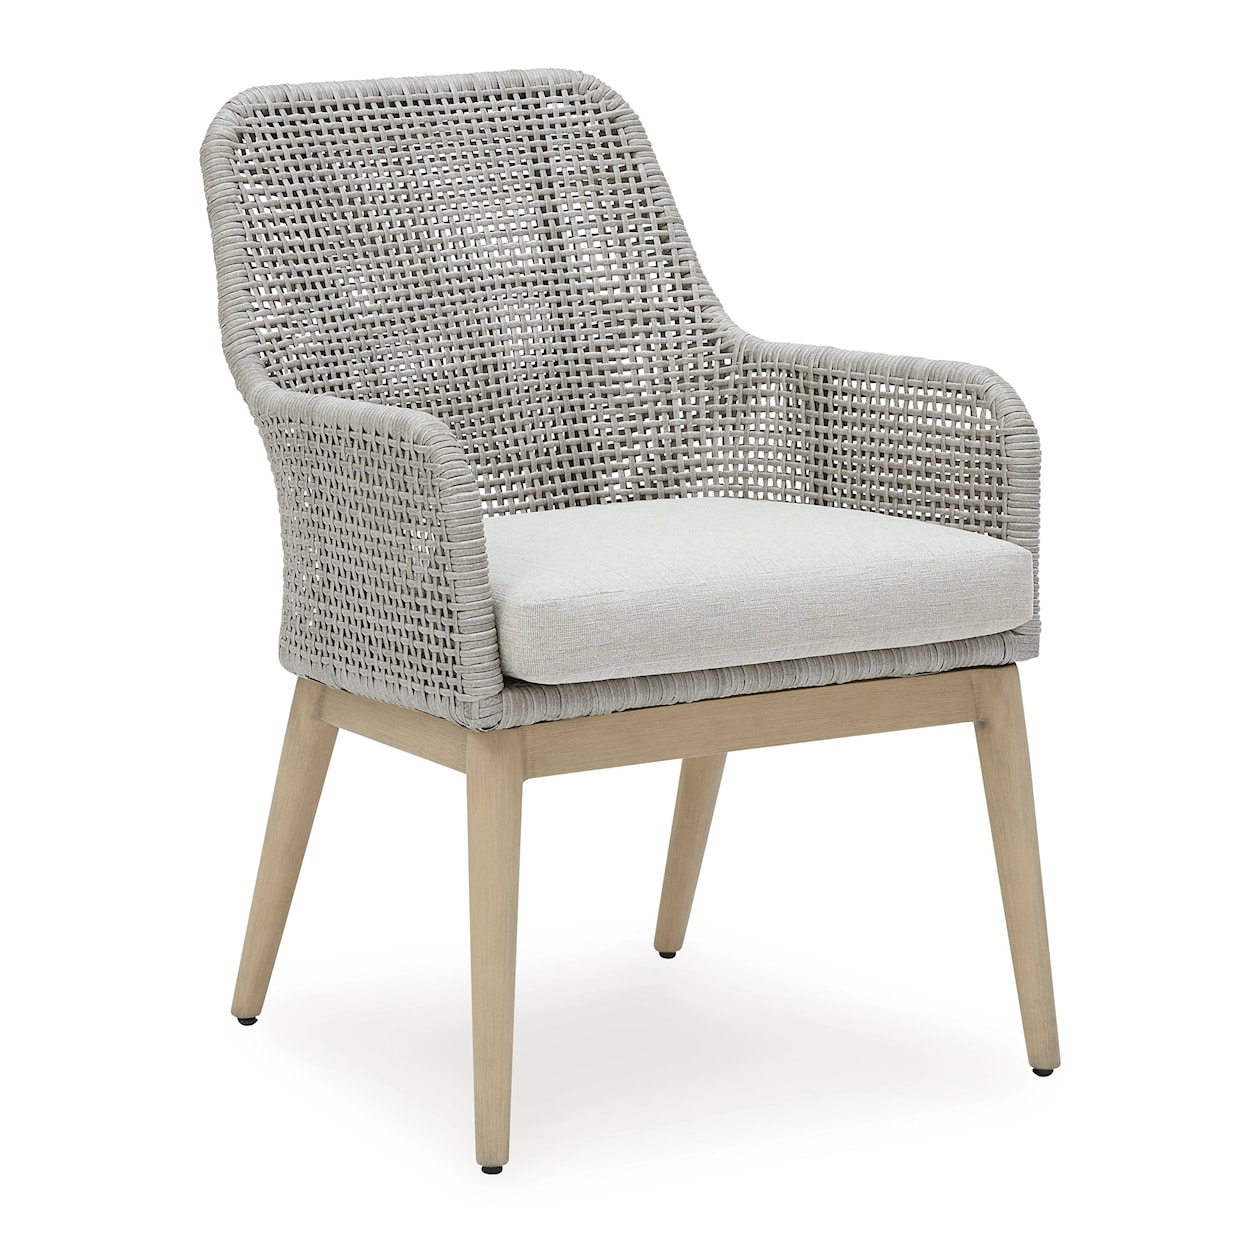 Signature Design by Ashley Seton Creek Outdoor Dining Chair with Cushion